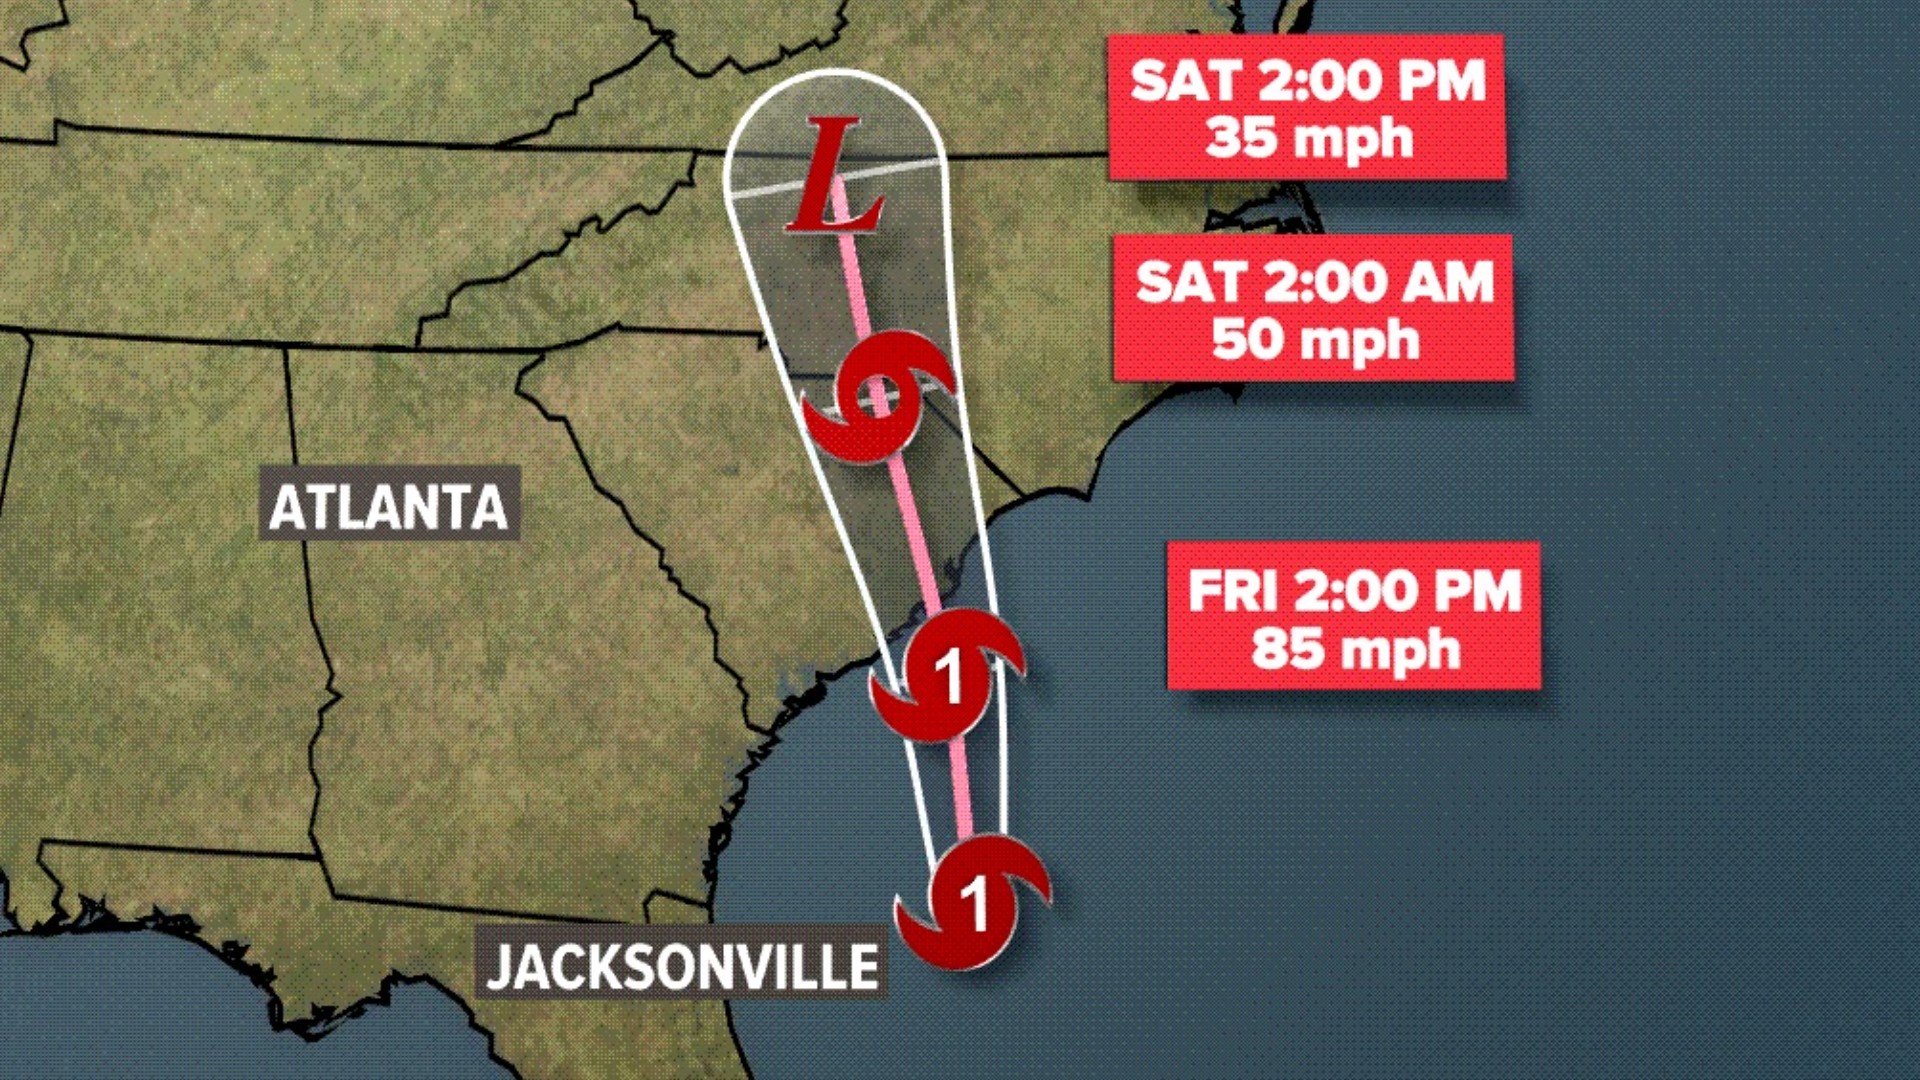 Hurricane Ian Updates on Beaufort County Operations and Services